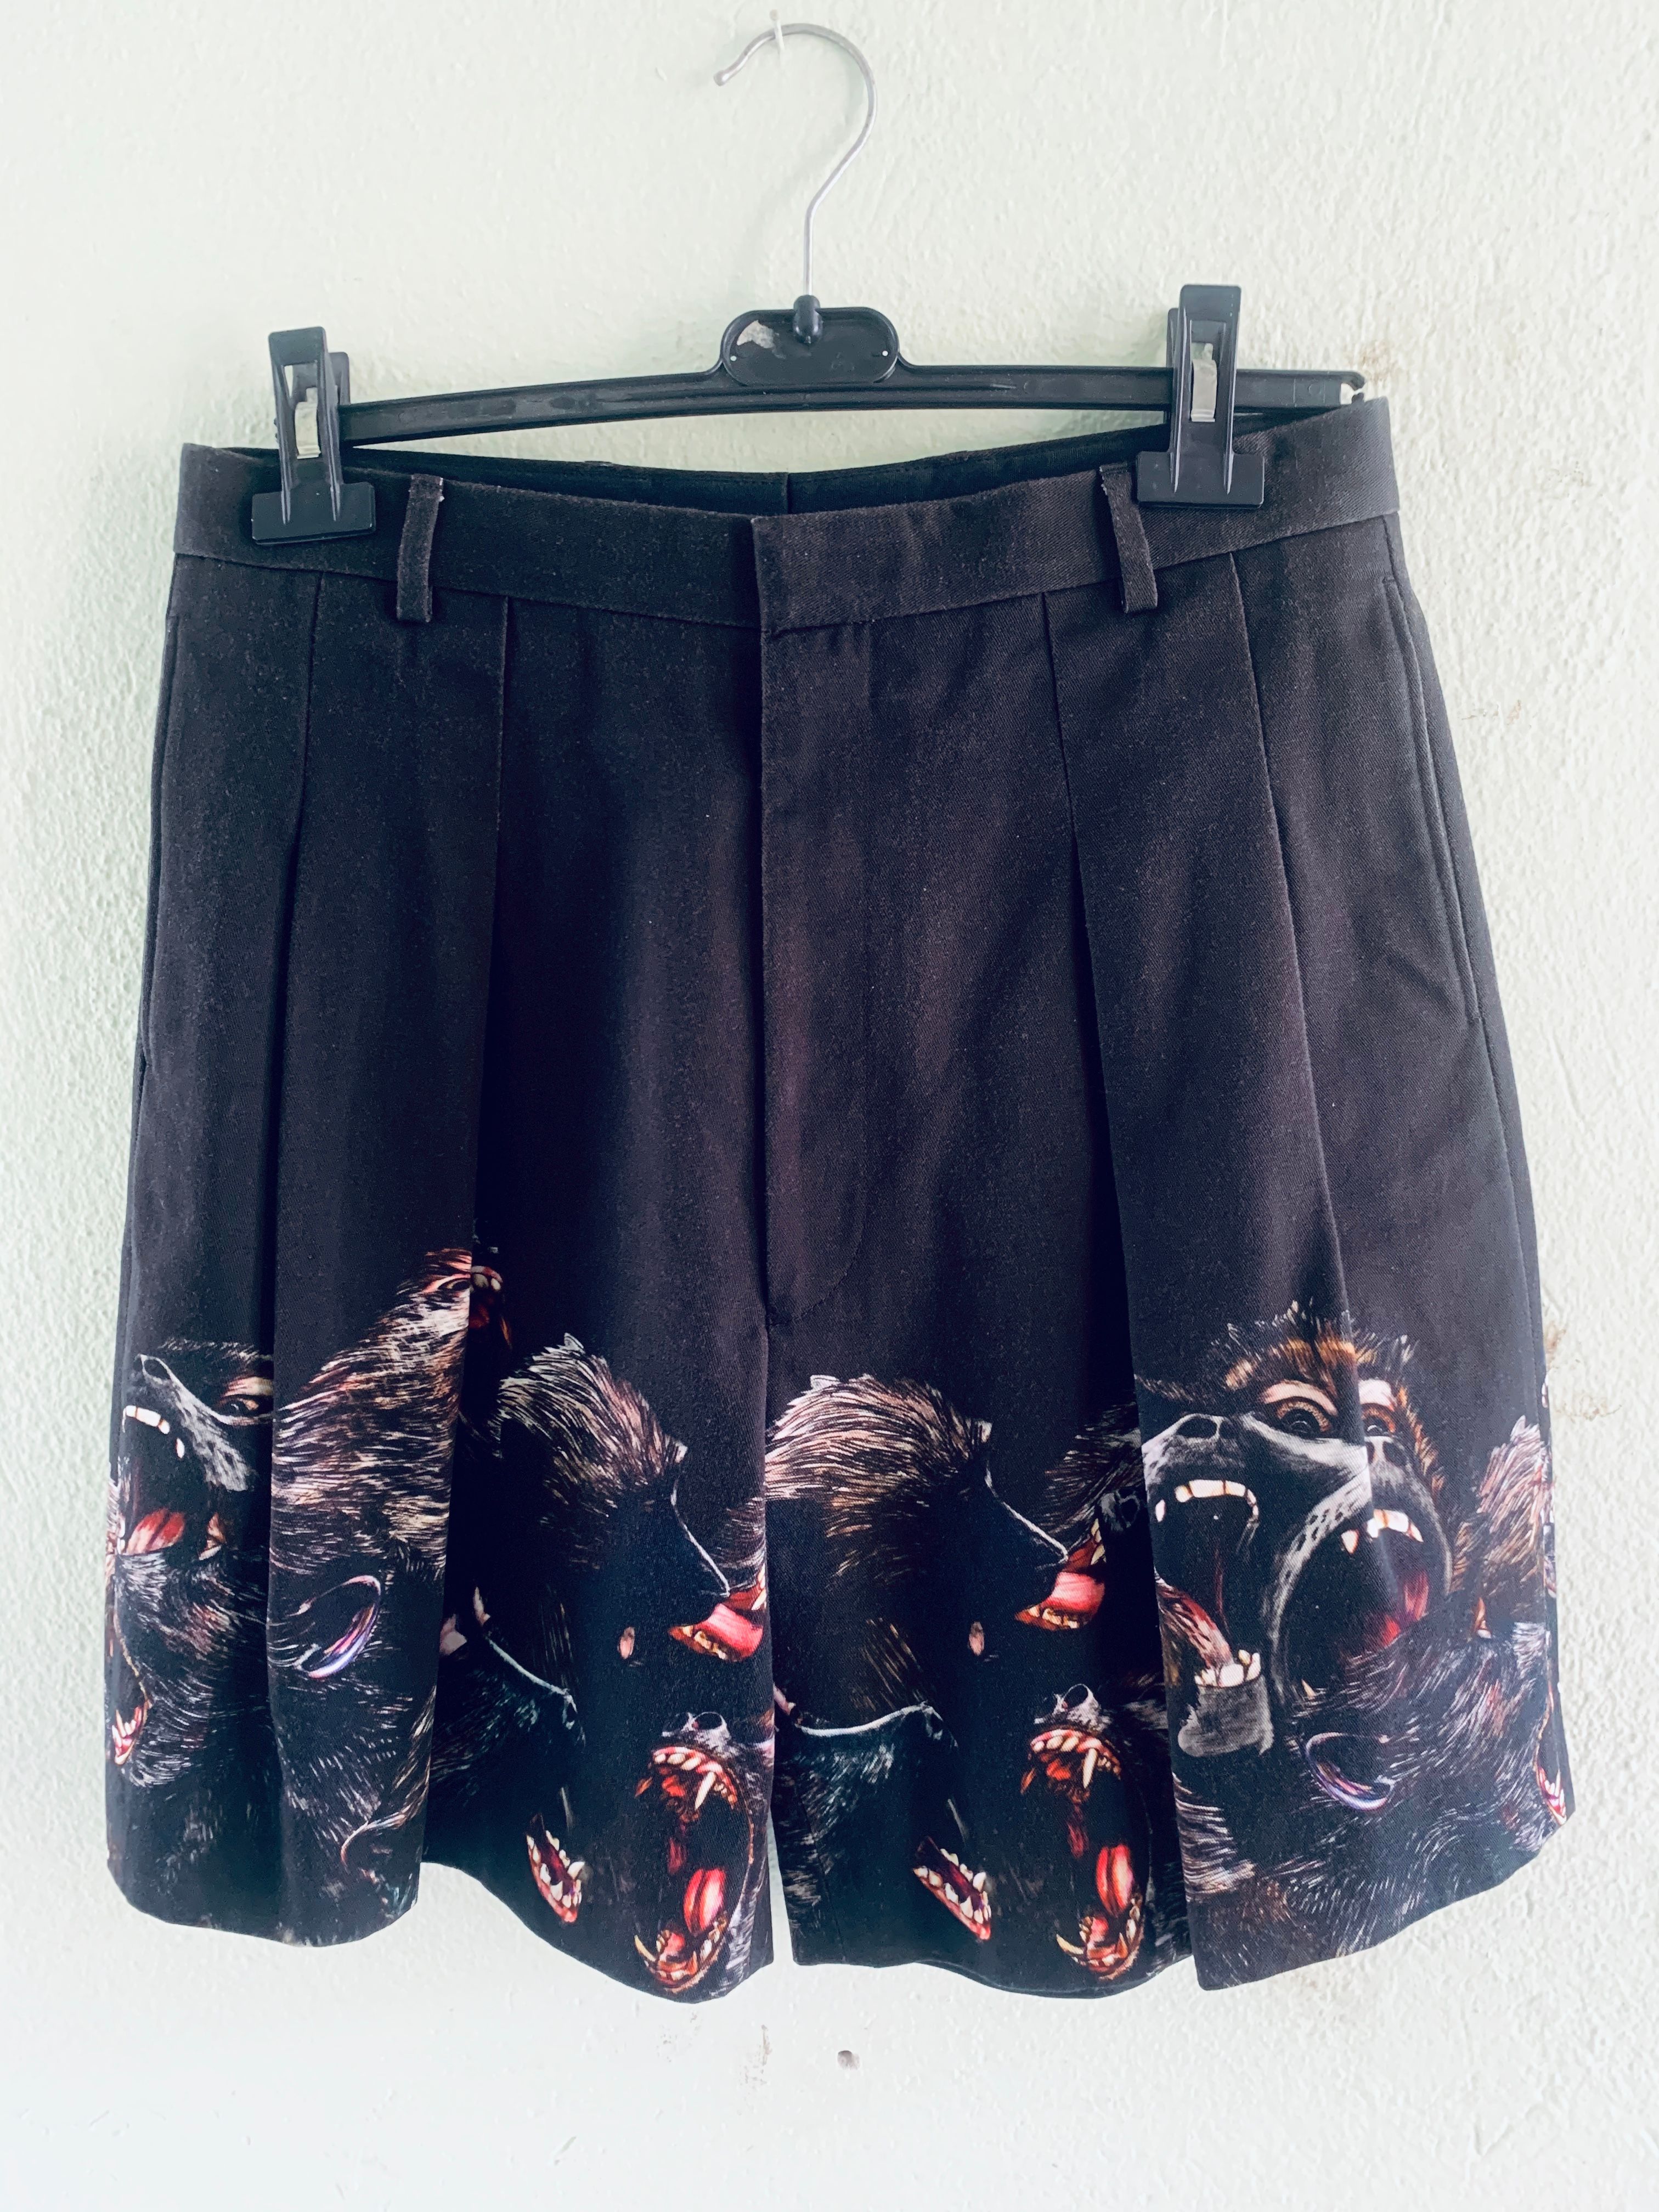 Givenchy Givenchy Monkey Brothers Collection Graphic Man Shorts | Grailed